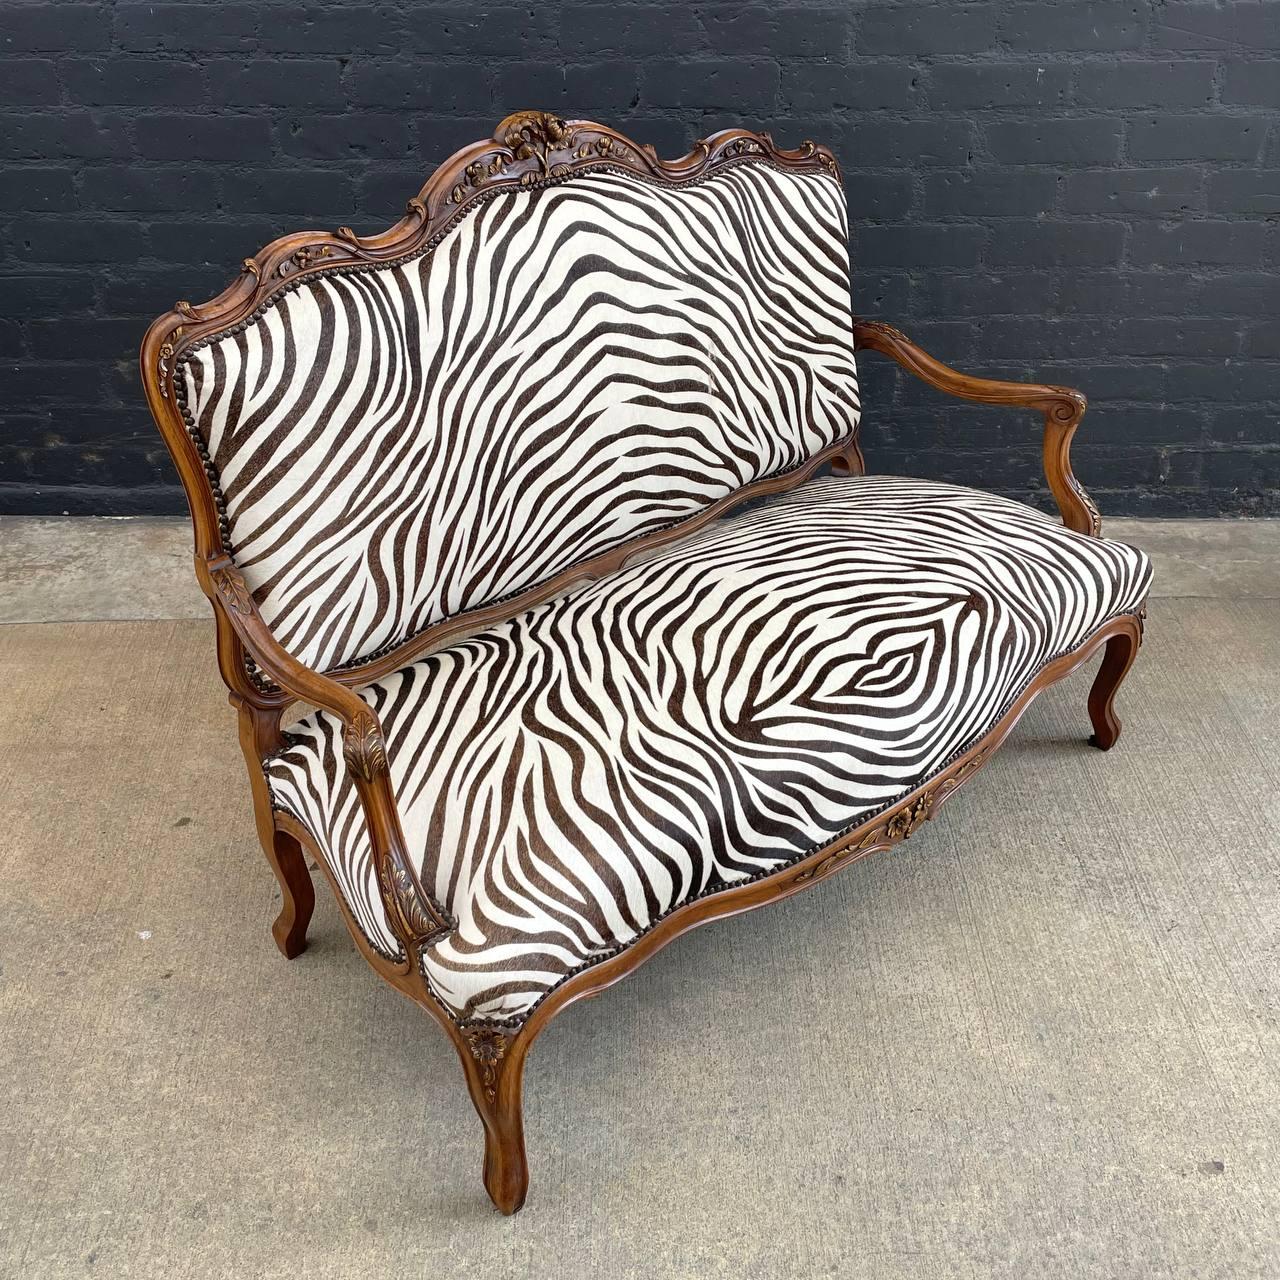 Antique French Louis XVI Carved Wood & Faux Zebra Leather Sofa

Designer: Unknwon
Country: France
Manufacturer: Unknown
Materials: Carved Wood, Faux Zebra Leather
Style: French Louis XVI
Year: 1920’s

$4,500 

Dimensions:
42”H x 55”W x